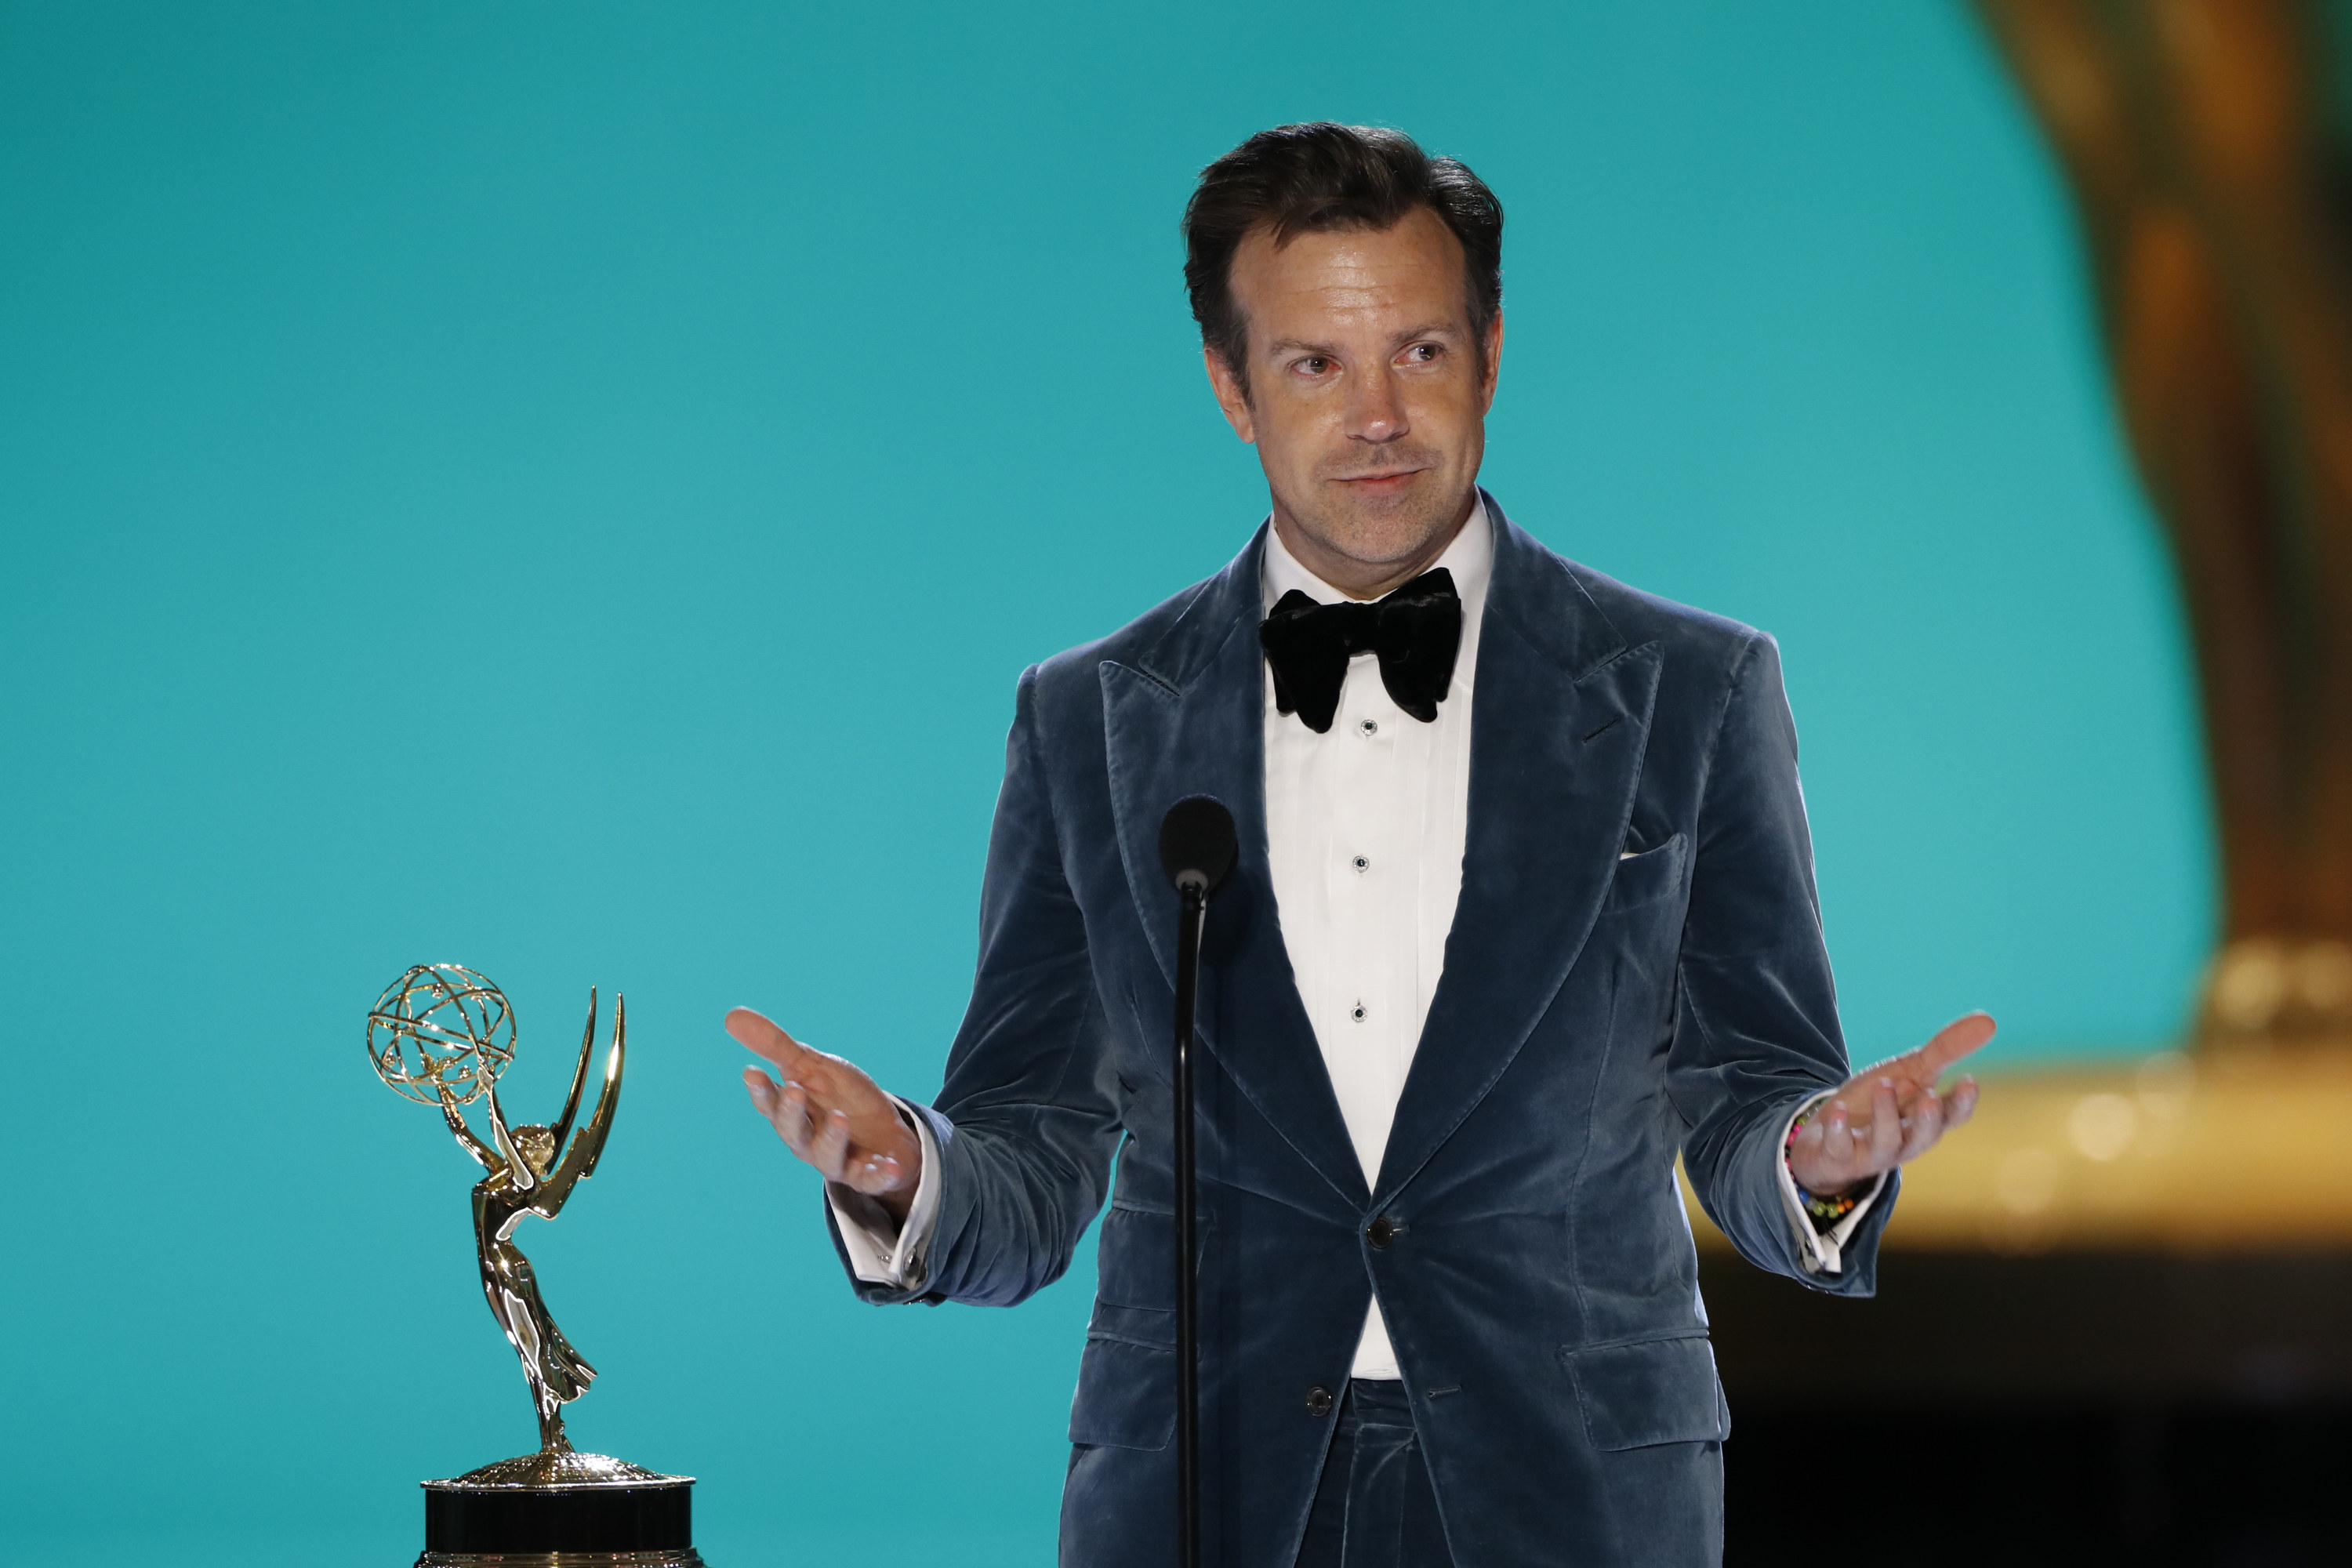 Sudeikis stands on stage next to an Emmy with his arms out